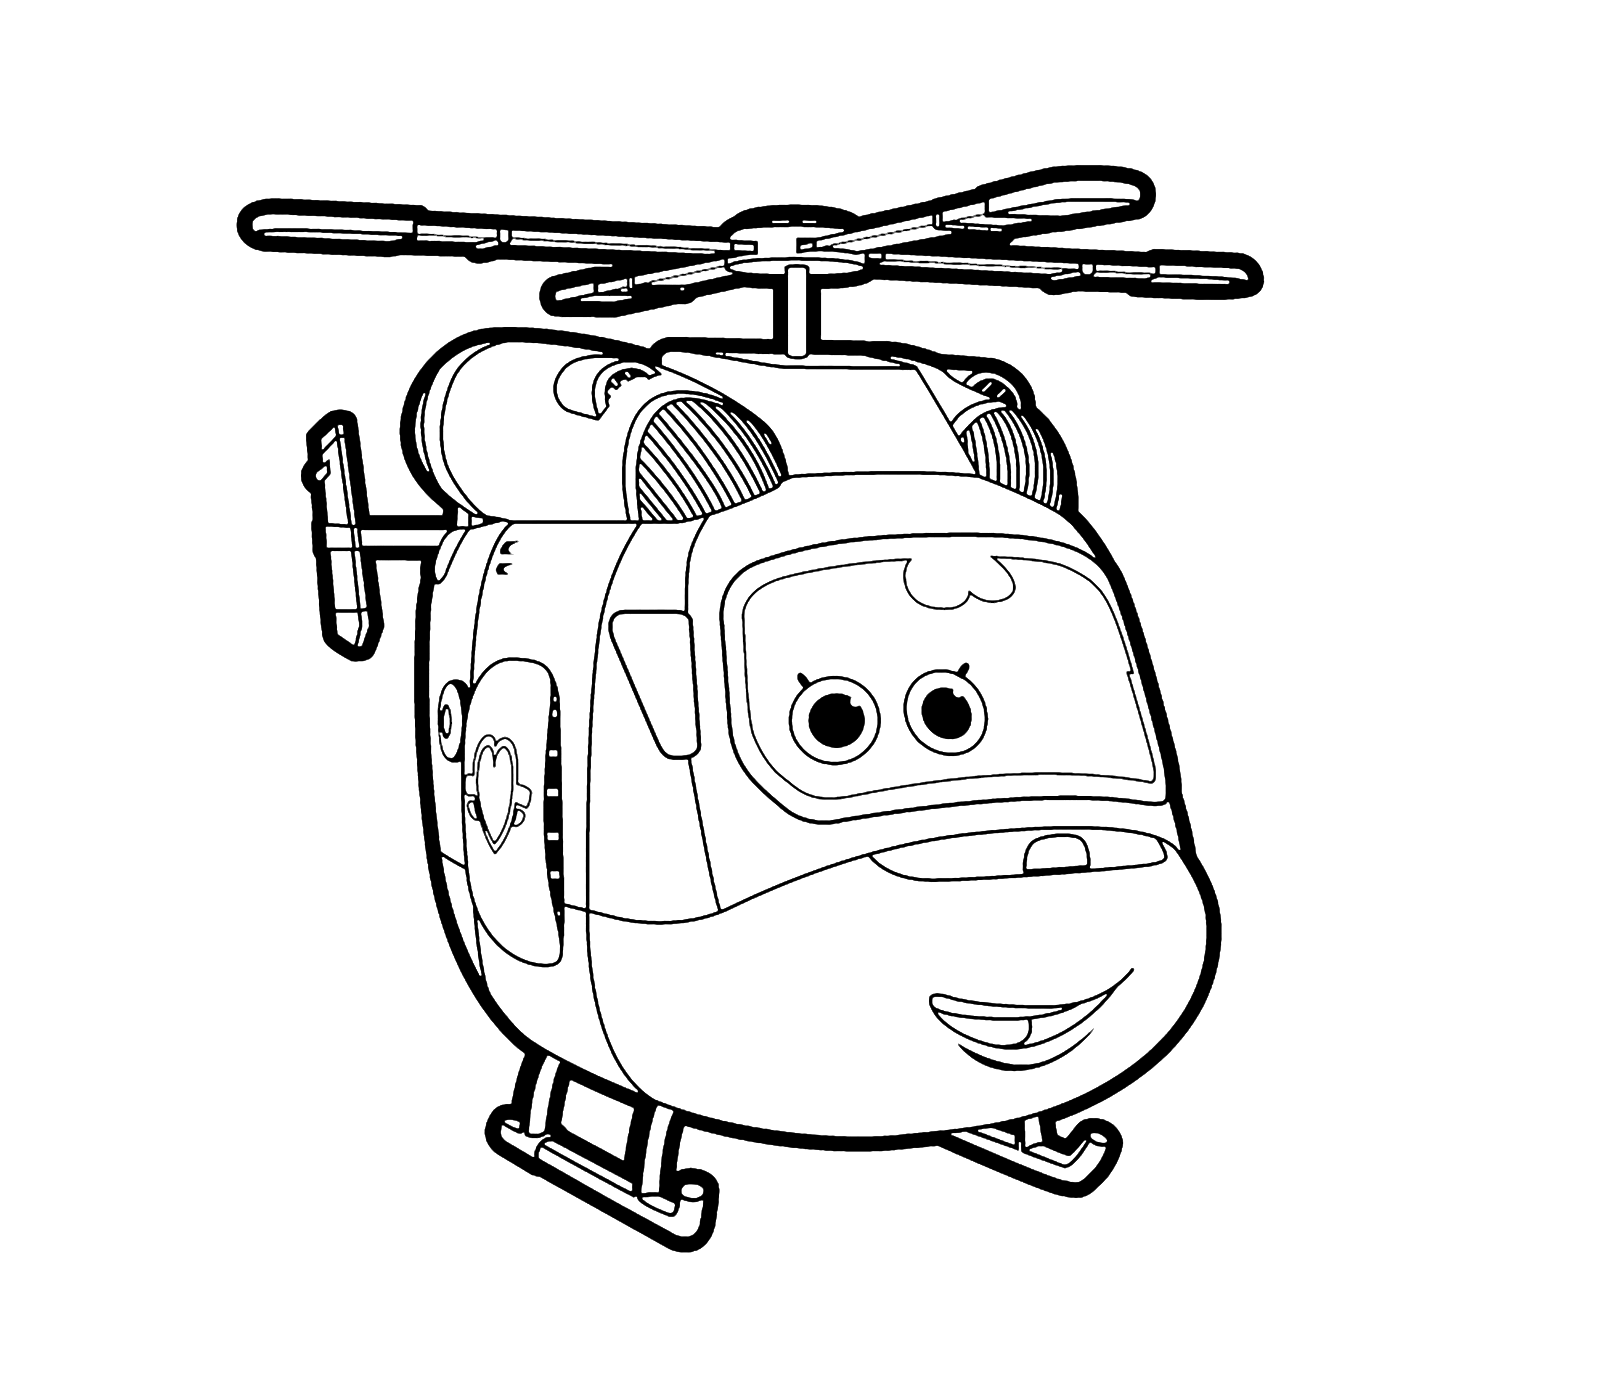 Super Wings - Dizzy the helicopter ready to take off